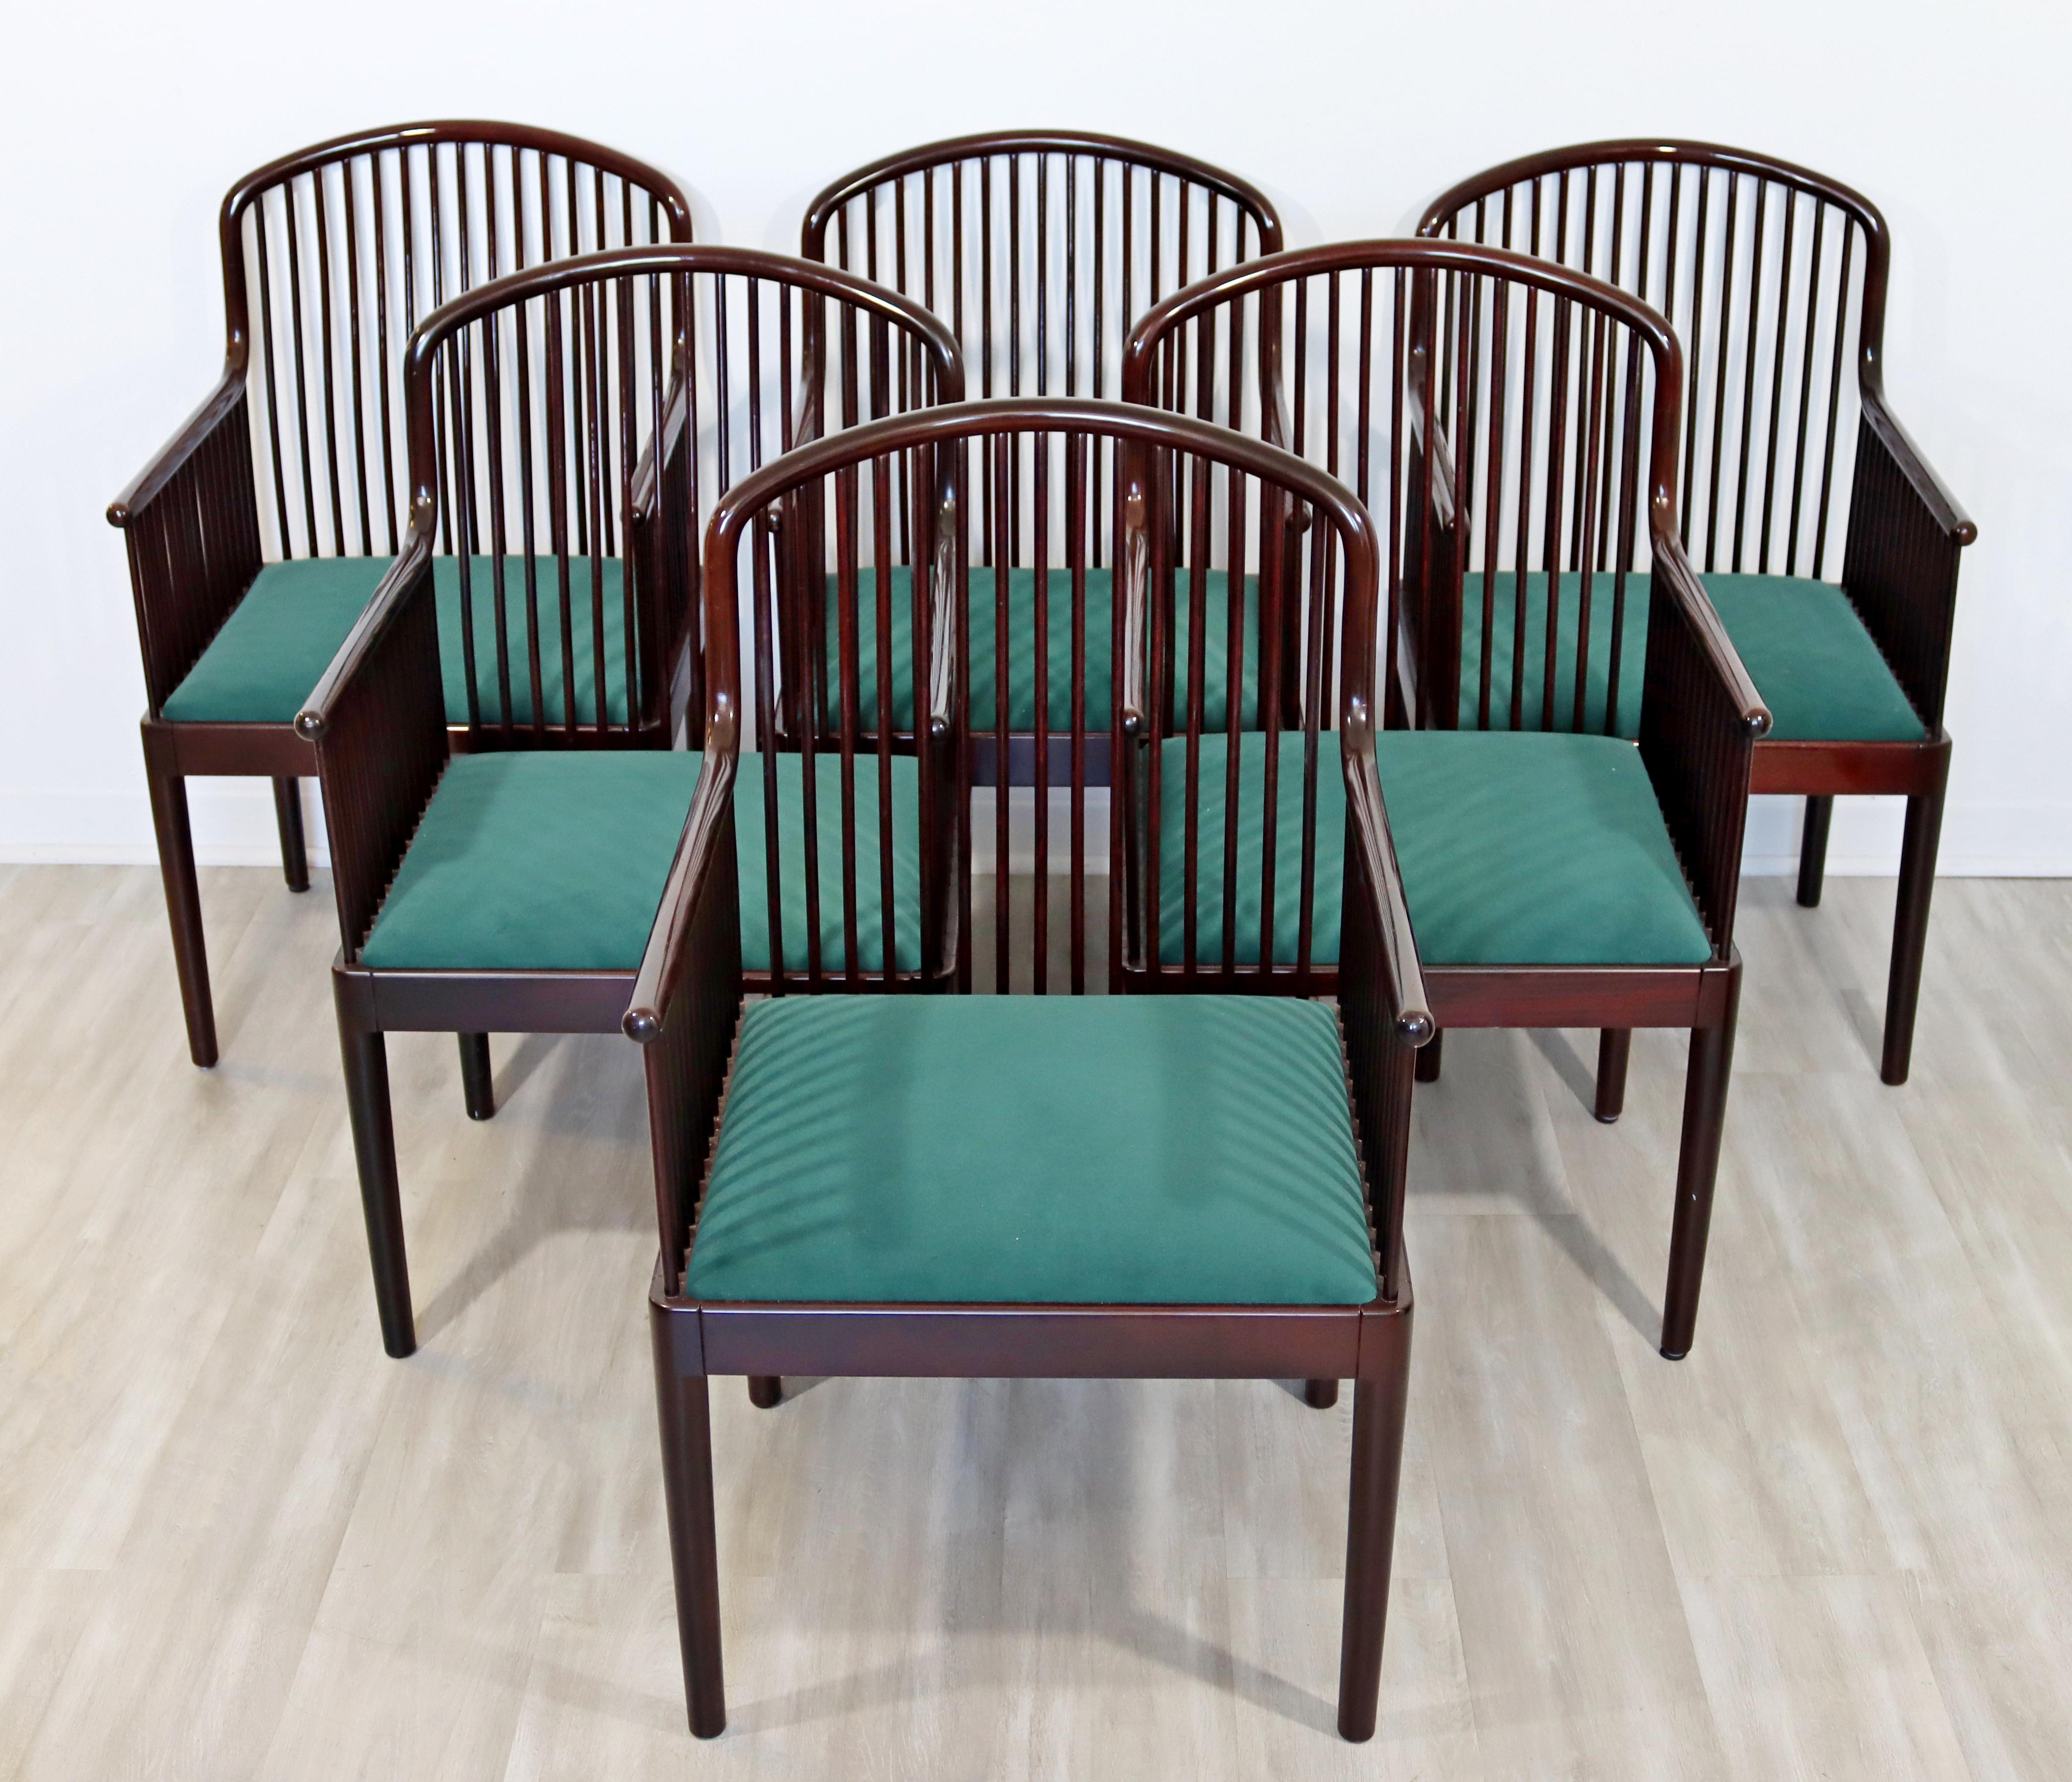 For your consideration is a spectacular, set of six, Andover rosewood dining side chairs, by Stendig, made in Italy, circa the 1980s. In very good vintage condition. The dimensions are 22